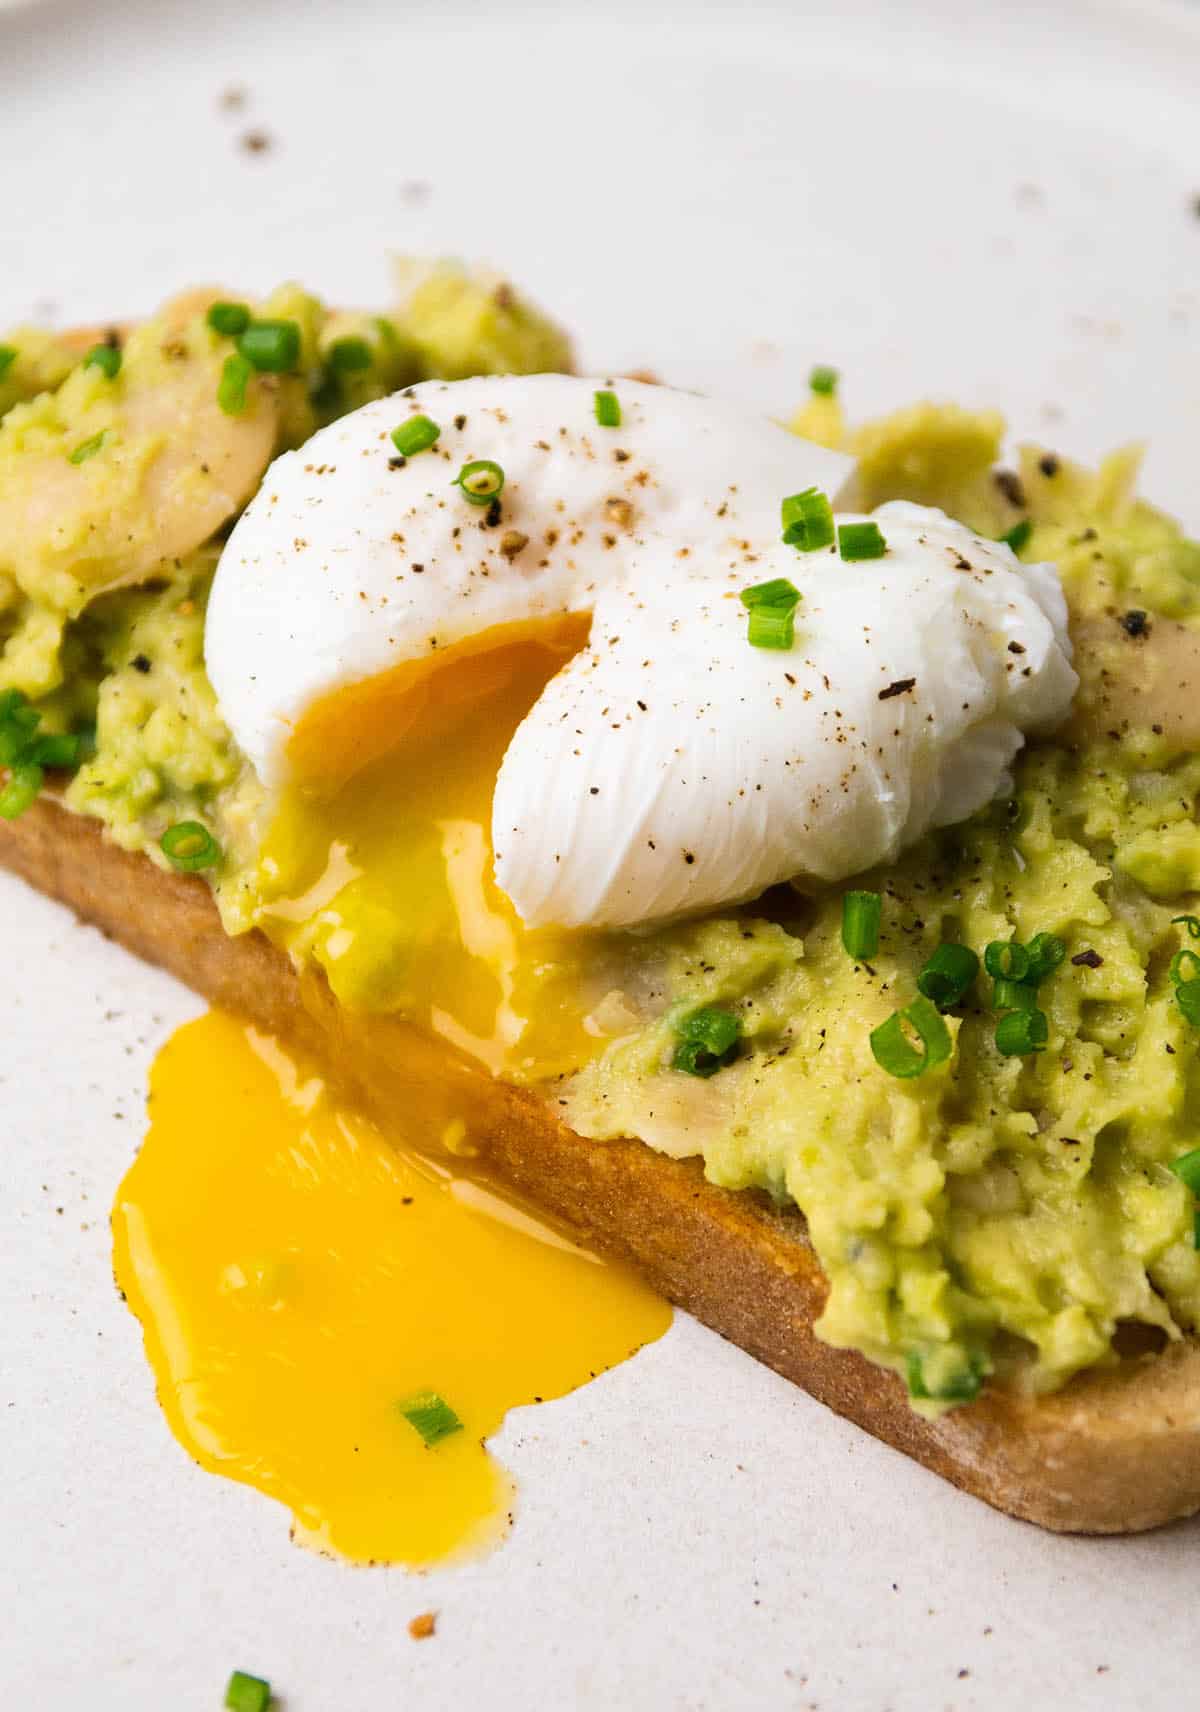 Poached egg with yolk running out on top of avocado toast.